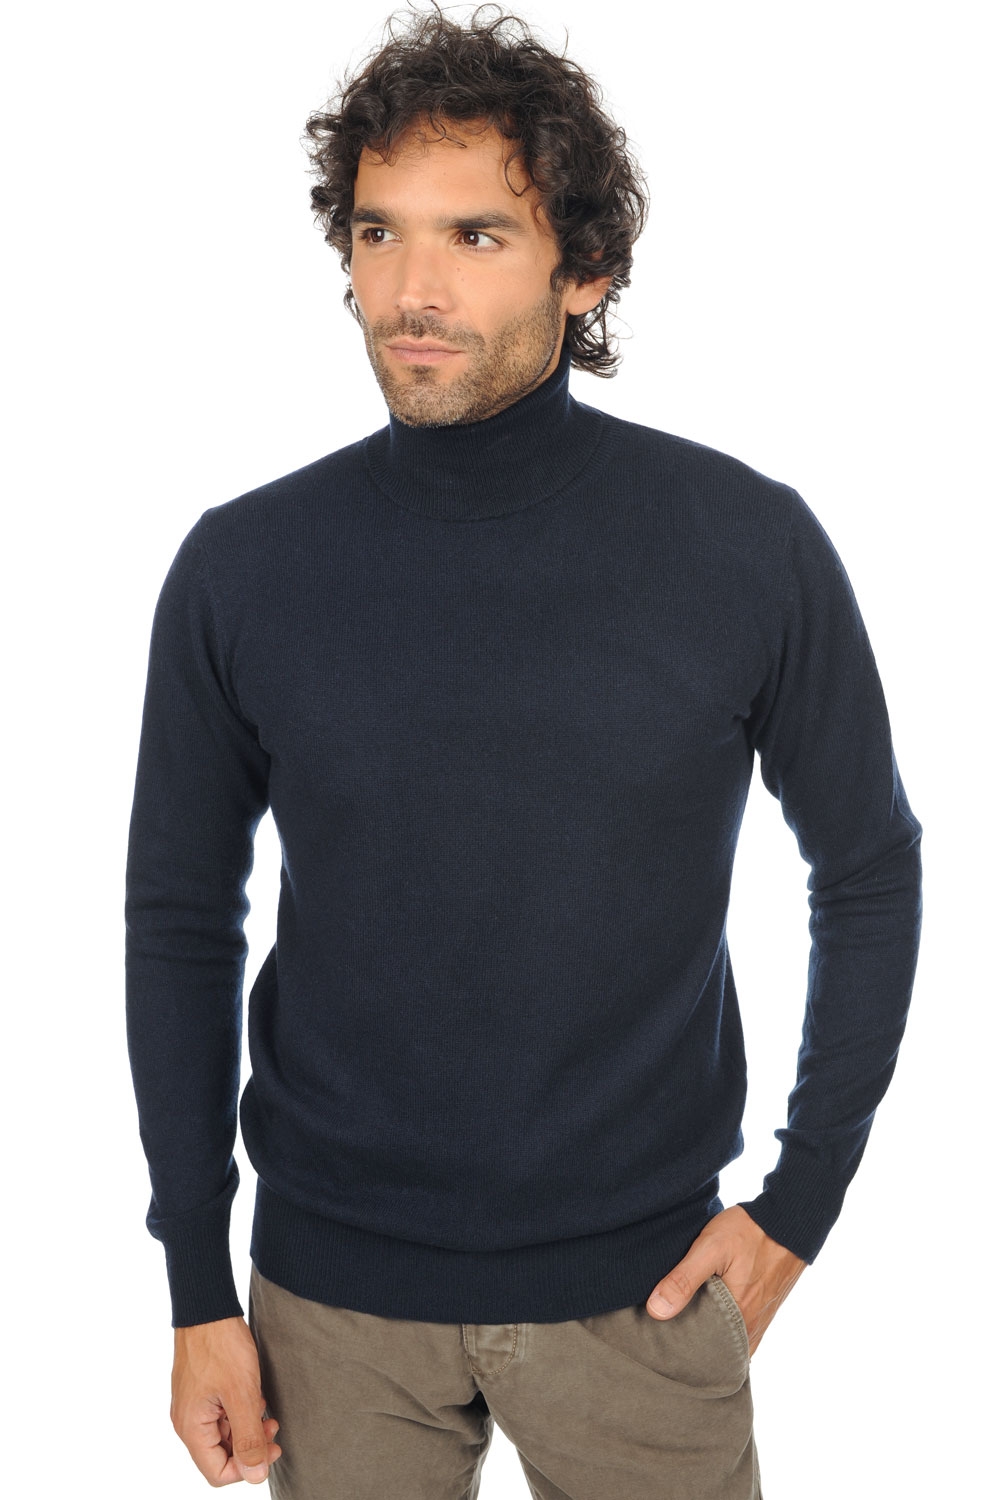 Cachemire pull homme col roule tarry first marine fonce s